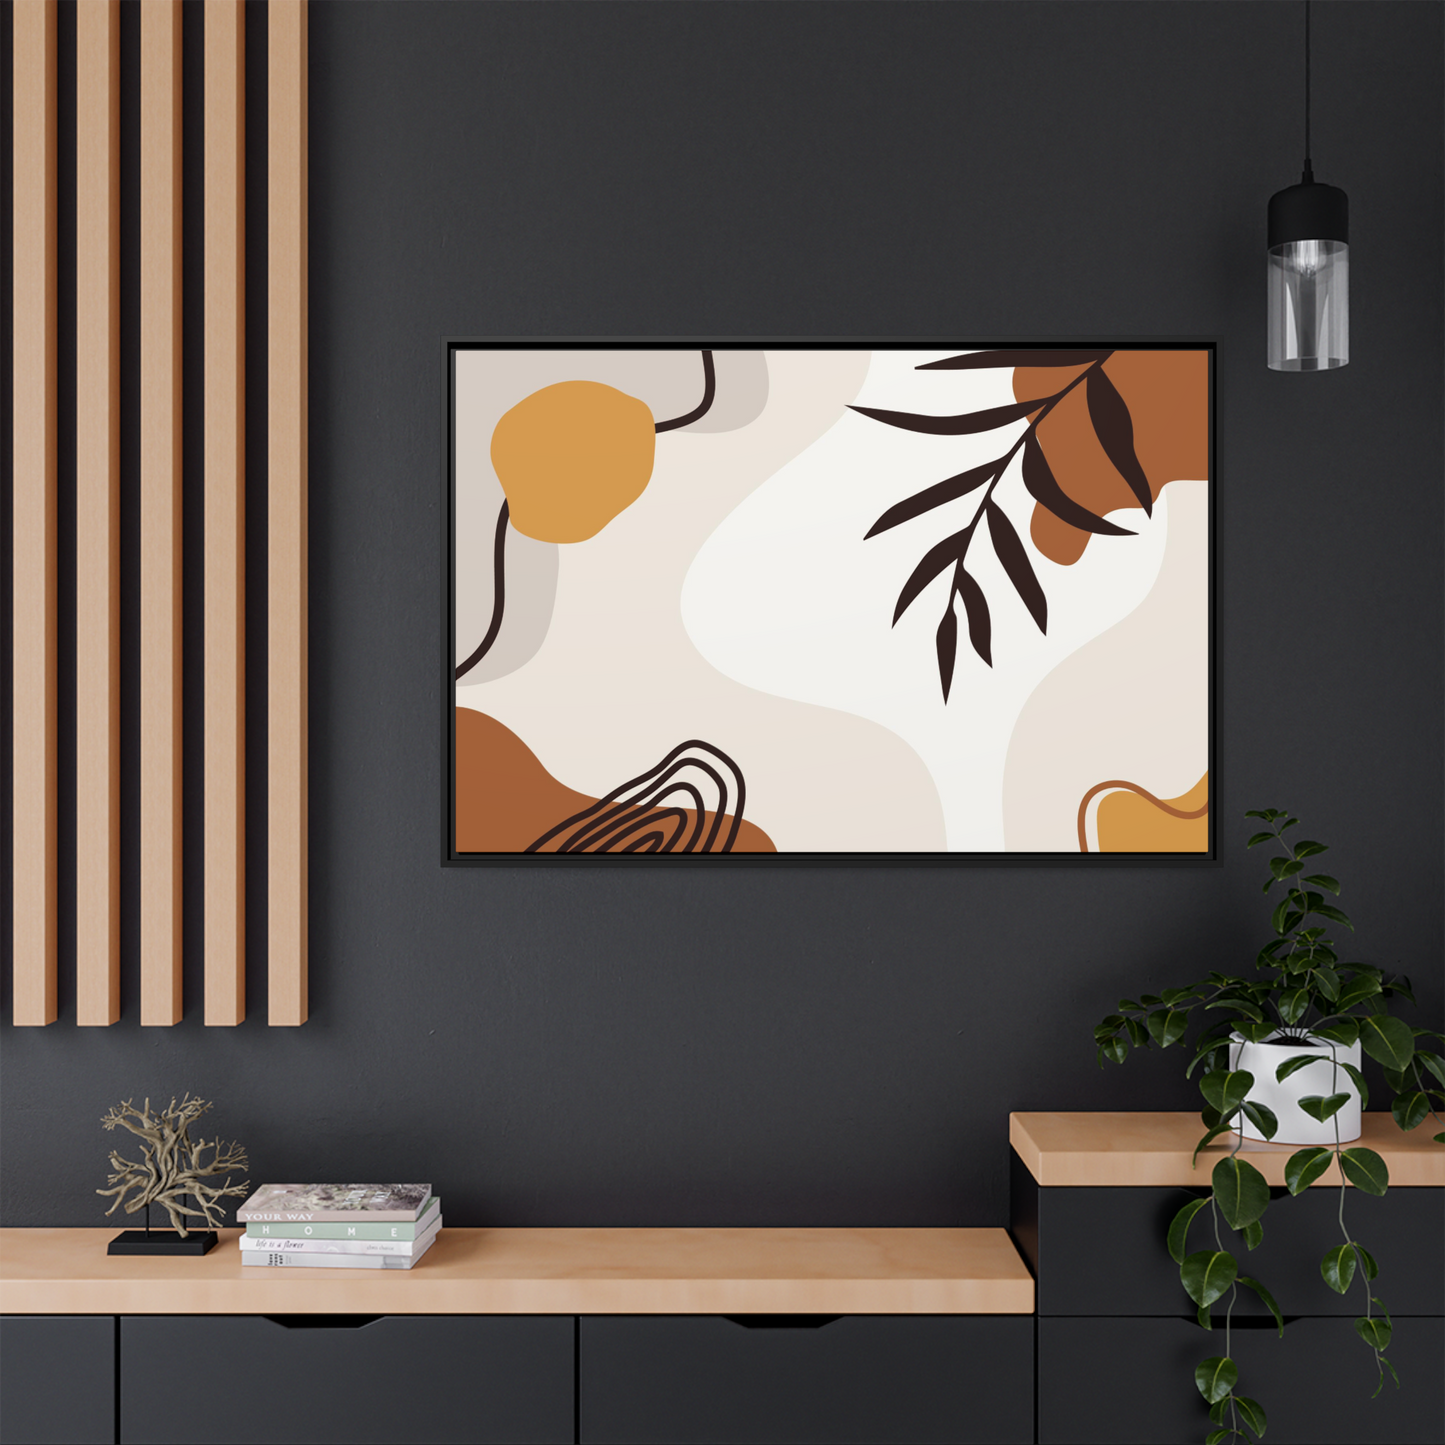 Framed Poster of Abstract Minimalist Art for Modern Wall Decor